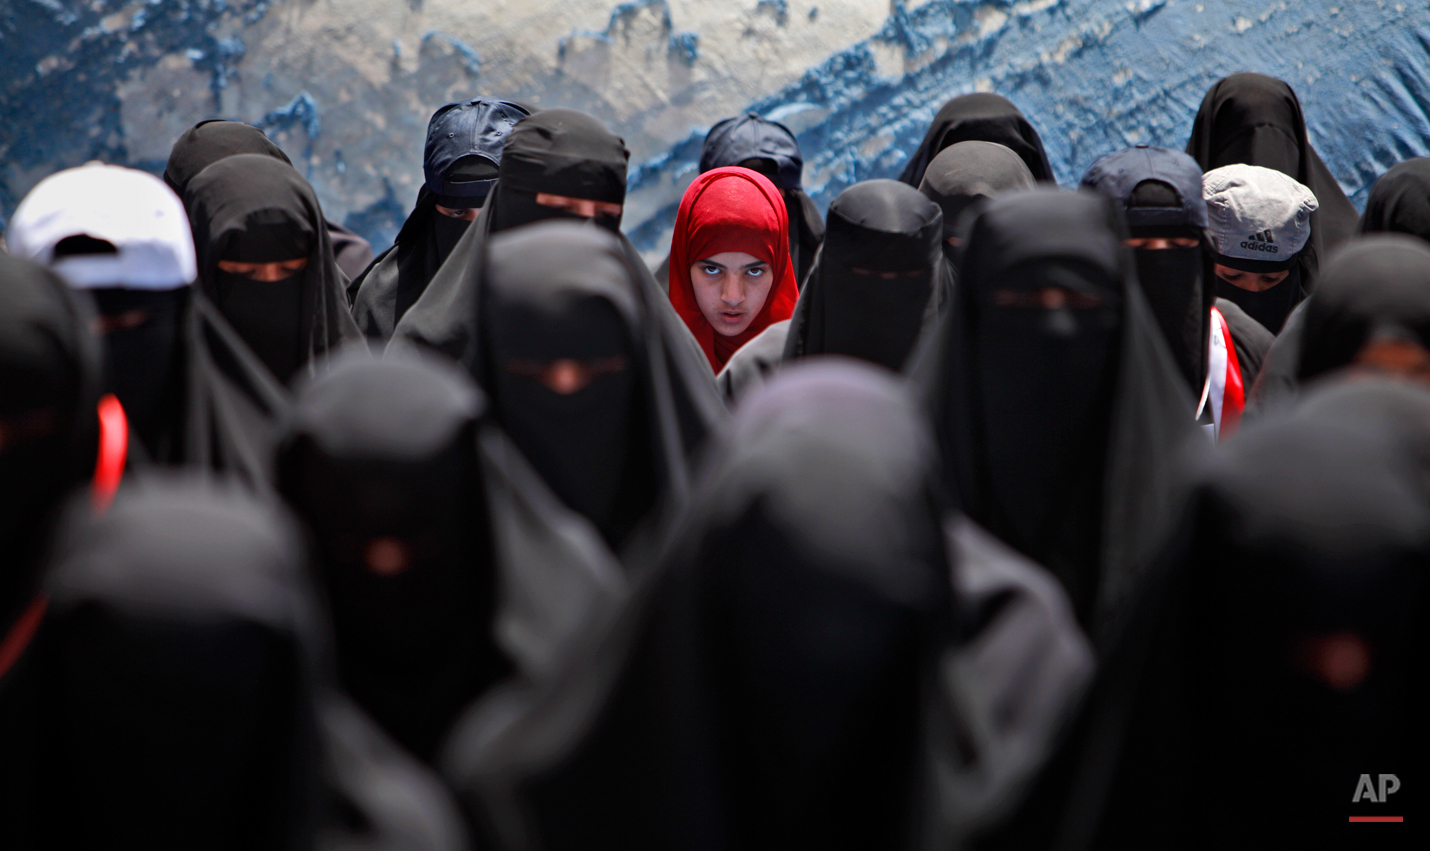  A female anti-government protestor, center, wearing a red scarf, looks on while praying with other women during a demonstration demanding the resignation of Yemeni President Ali Abdullah Saleh, in Sanaa,Yemen, Wednesday, April 6, 2011. Defying a dea